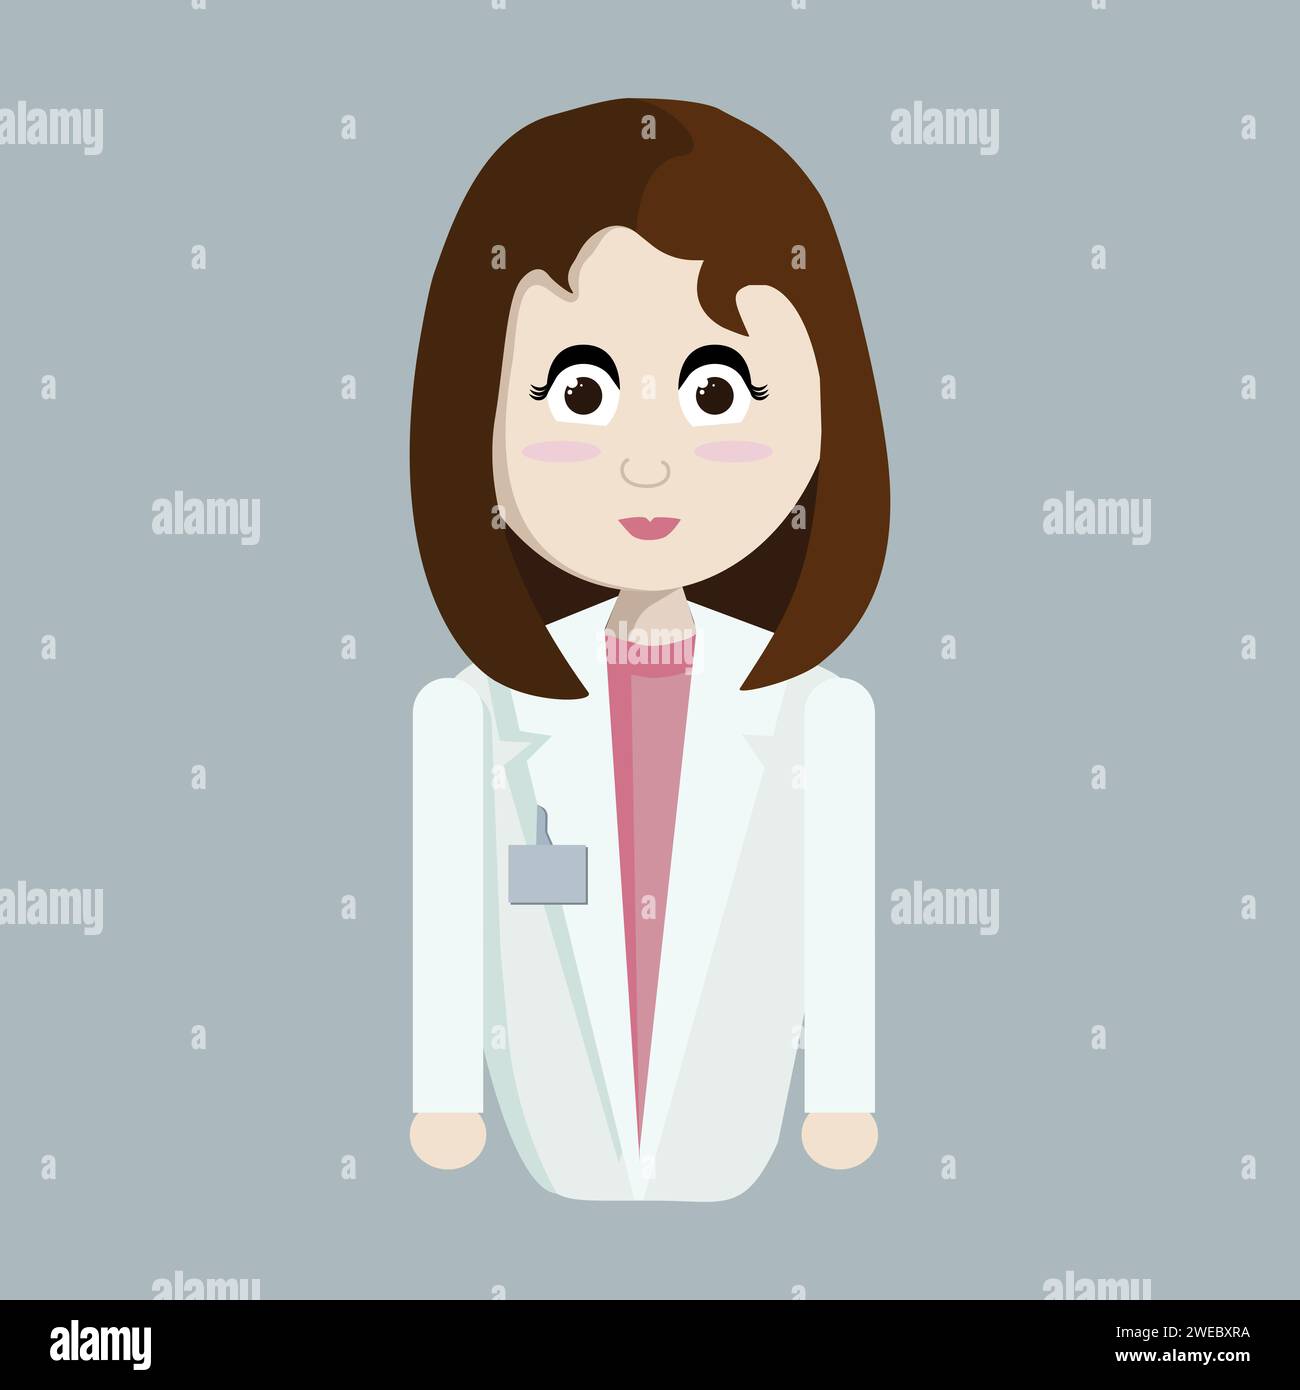 The doctor is a woman with dark brown hair and big eyes, with a nametag on her white coat and wearing a pink blouse. A waist-length figure. Vector Stock Vector